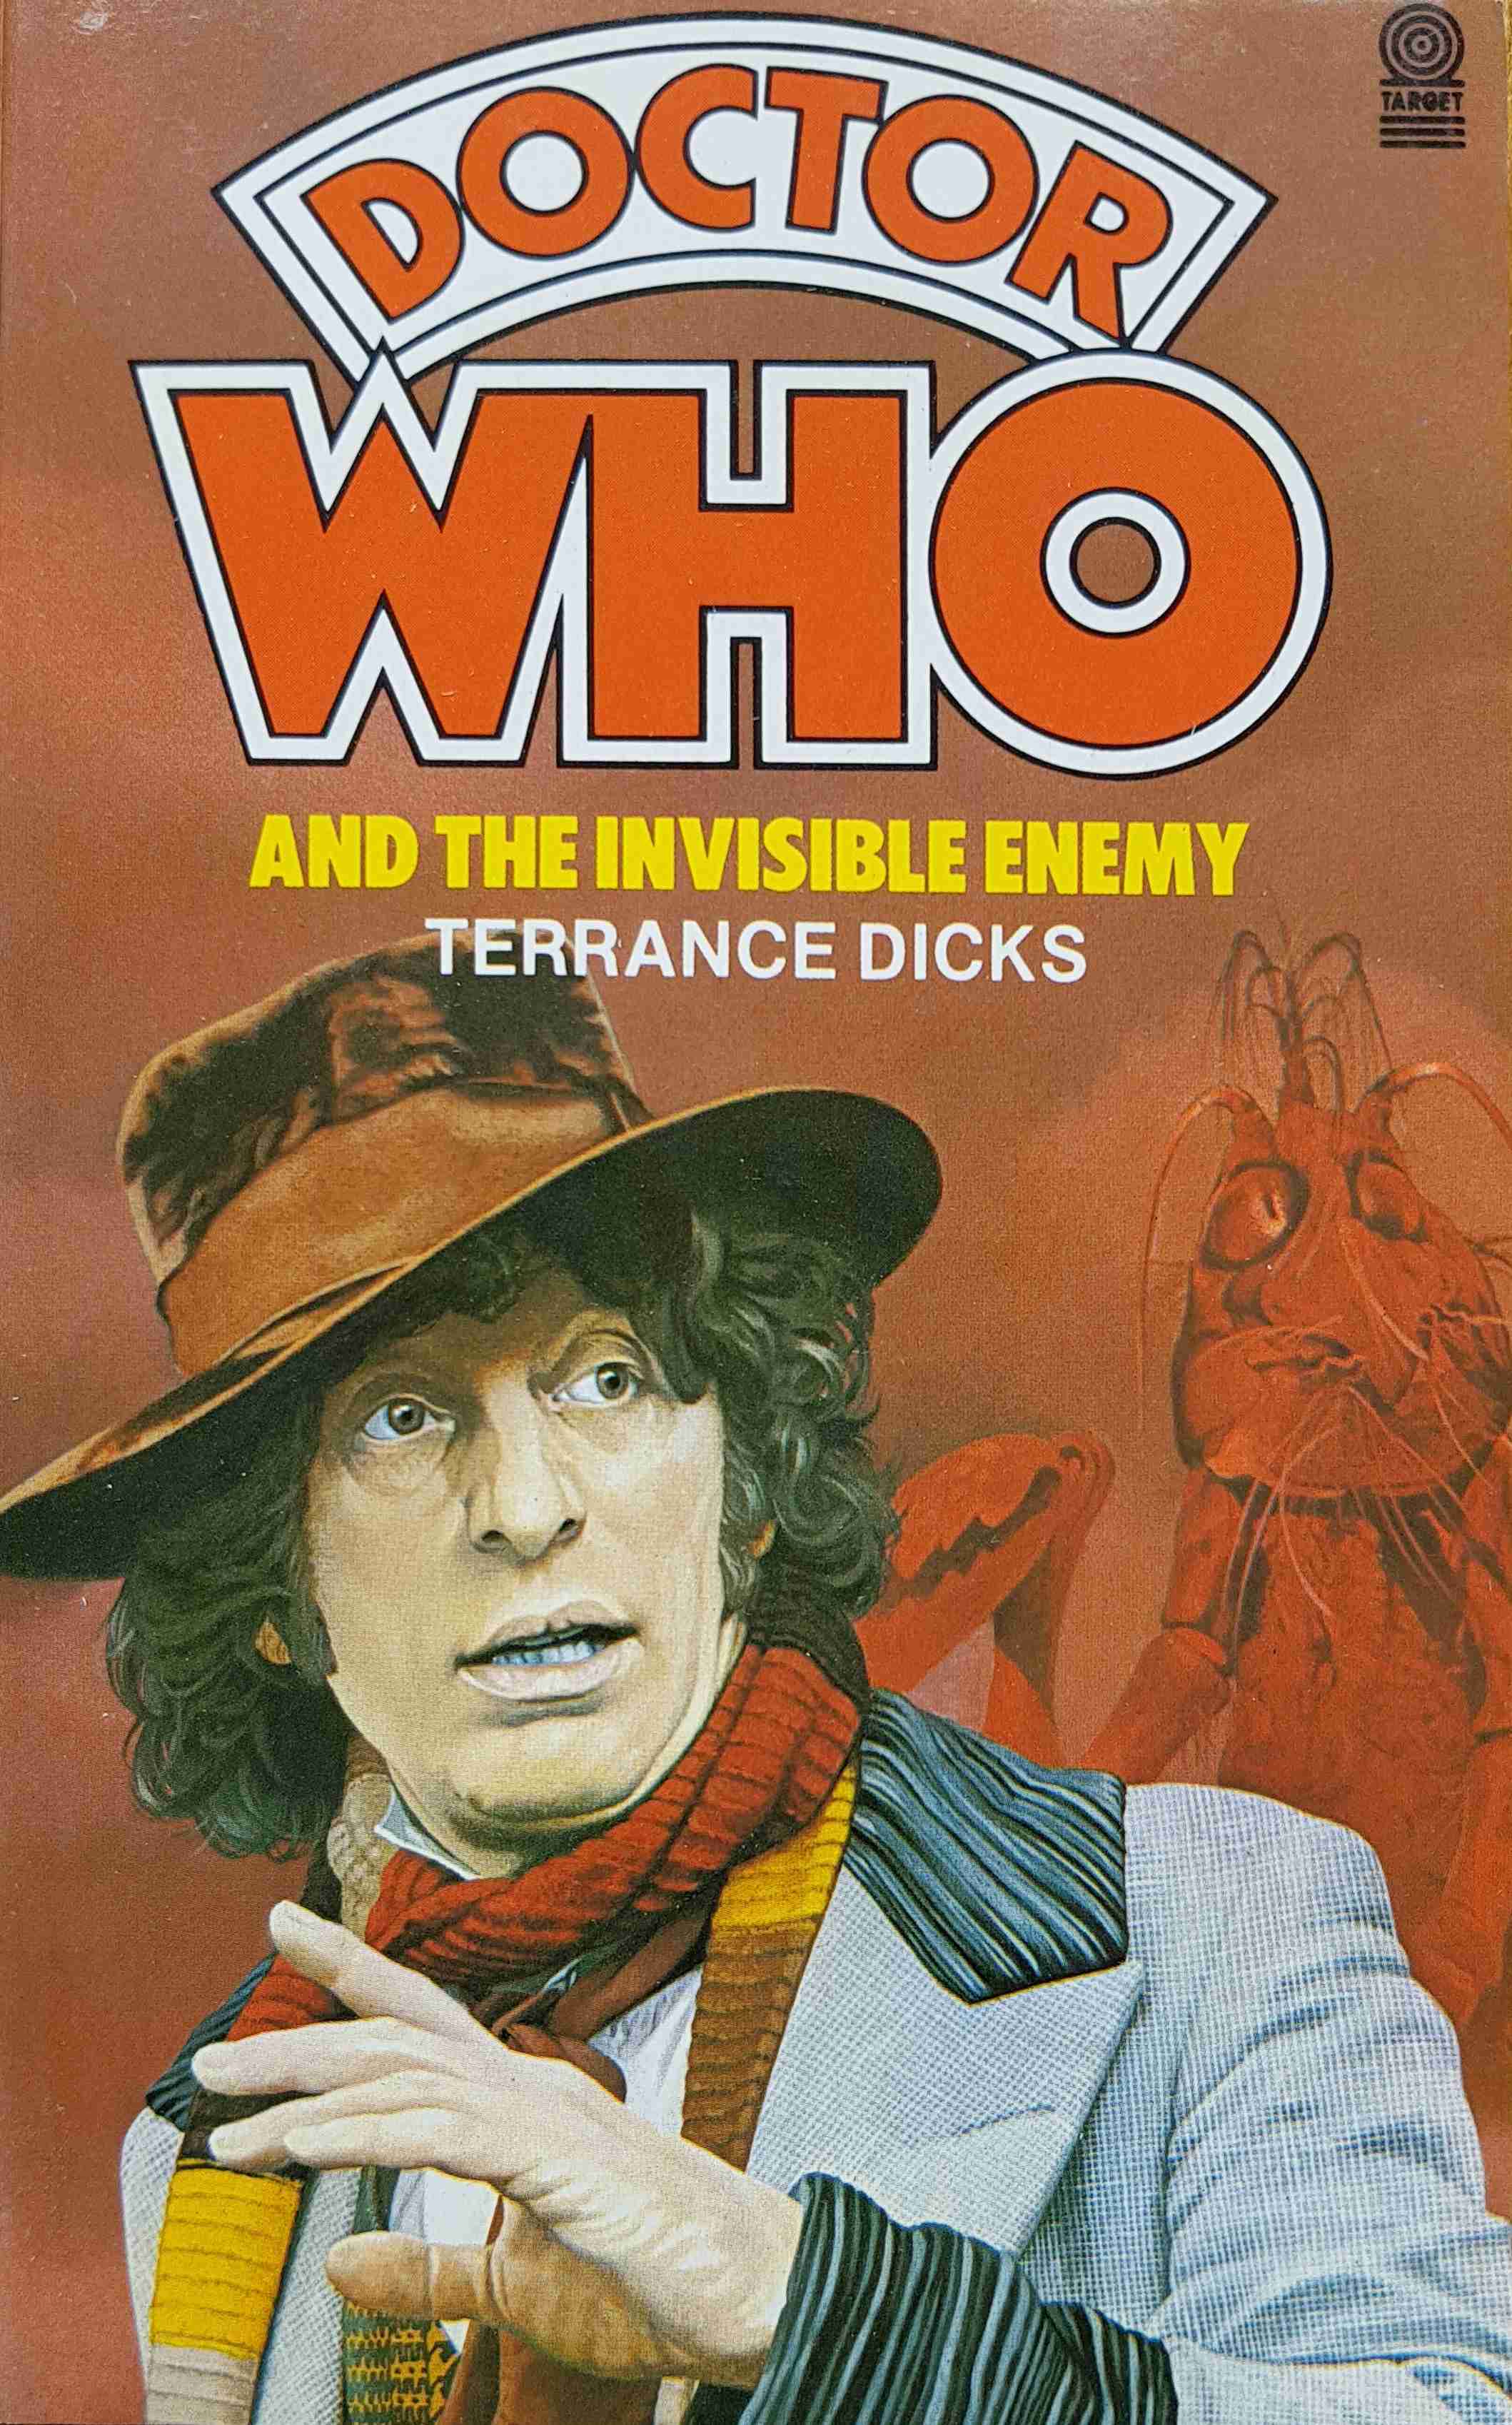 Picture of 0-426-20054-3 Doctor Who - The invisible enemy by artist Terrance Dicks from the BBC records and Tapes library